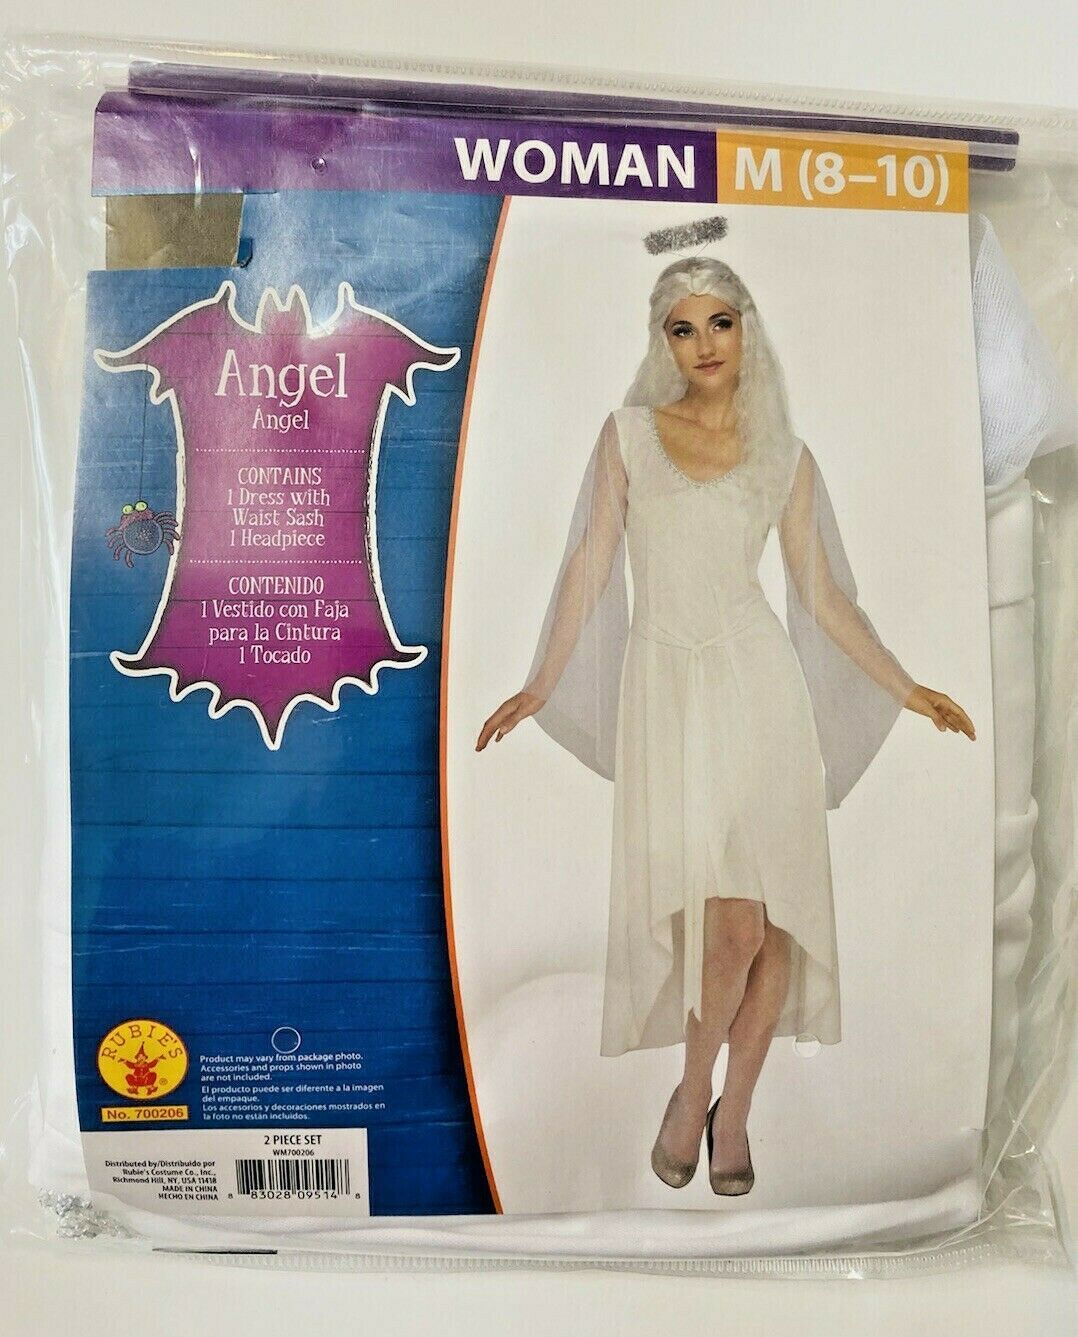 Primary image for Rubies Angel Woman's M Halloween Costume White Dress Sash Silver Headpiece